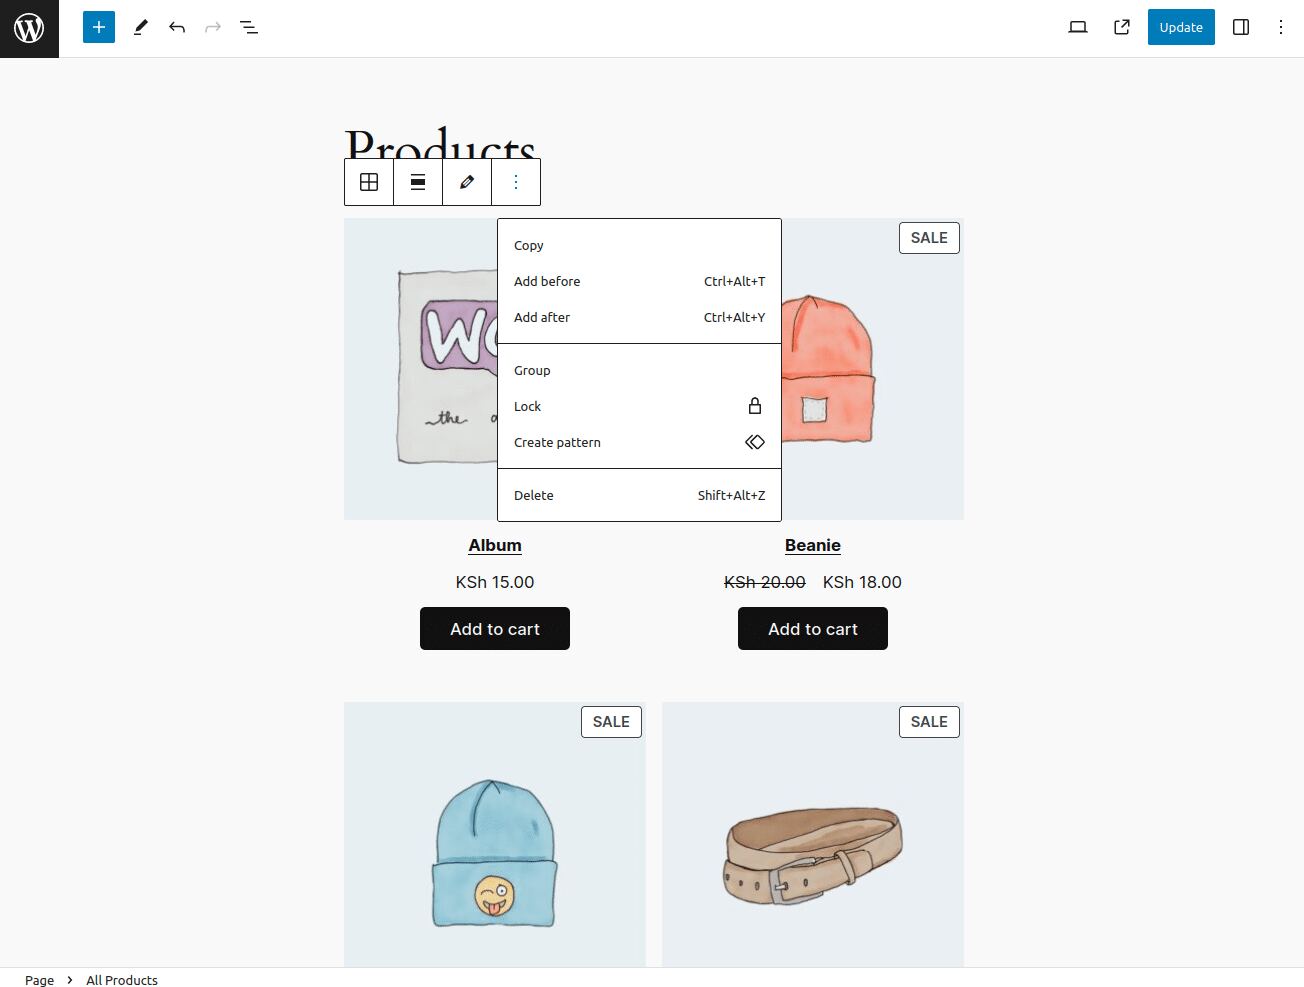 The Products page displays a menu with the options to Copy, Add before, Add after, Group, Lock, Create pattern, and Delete